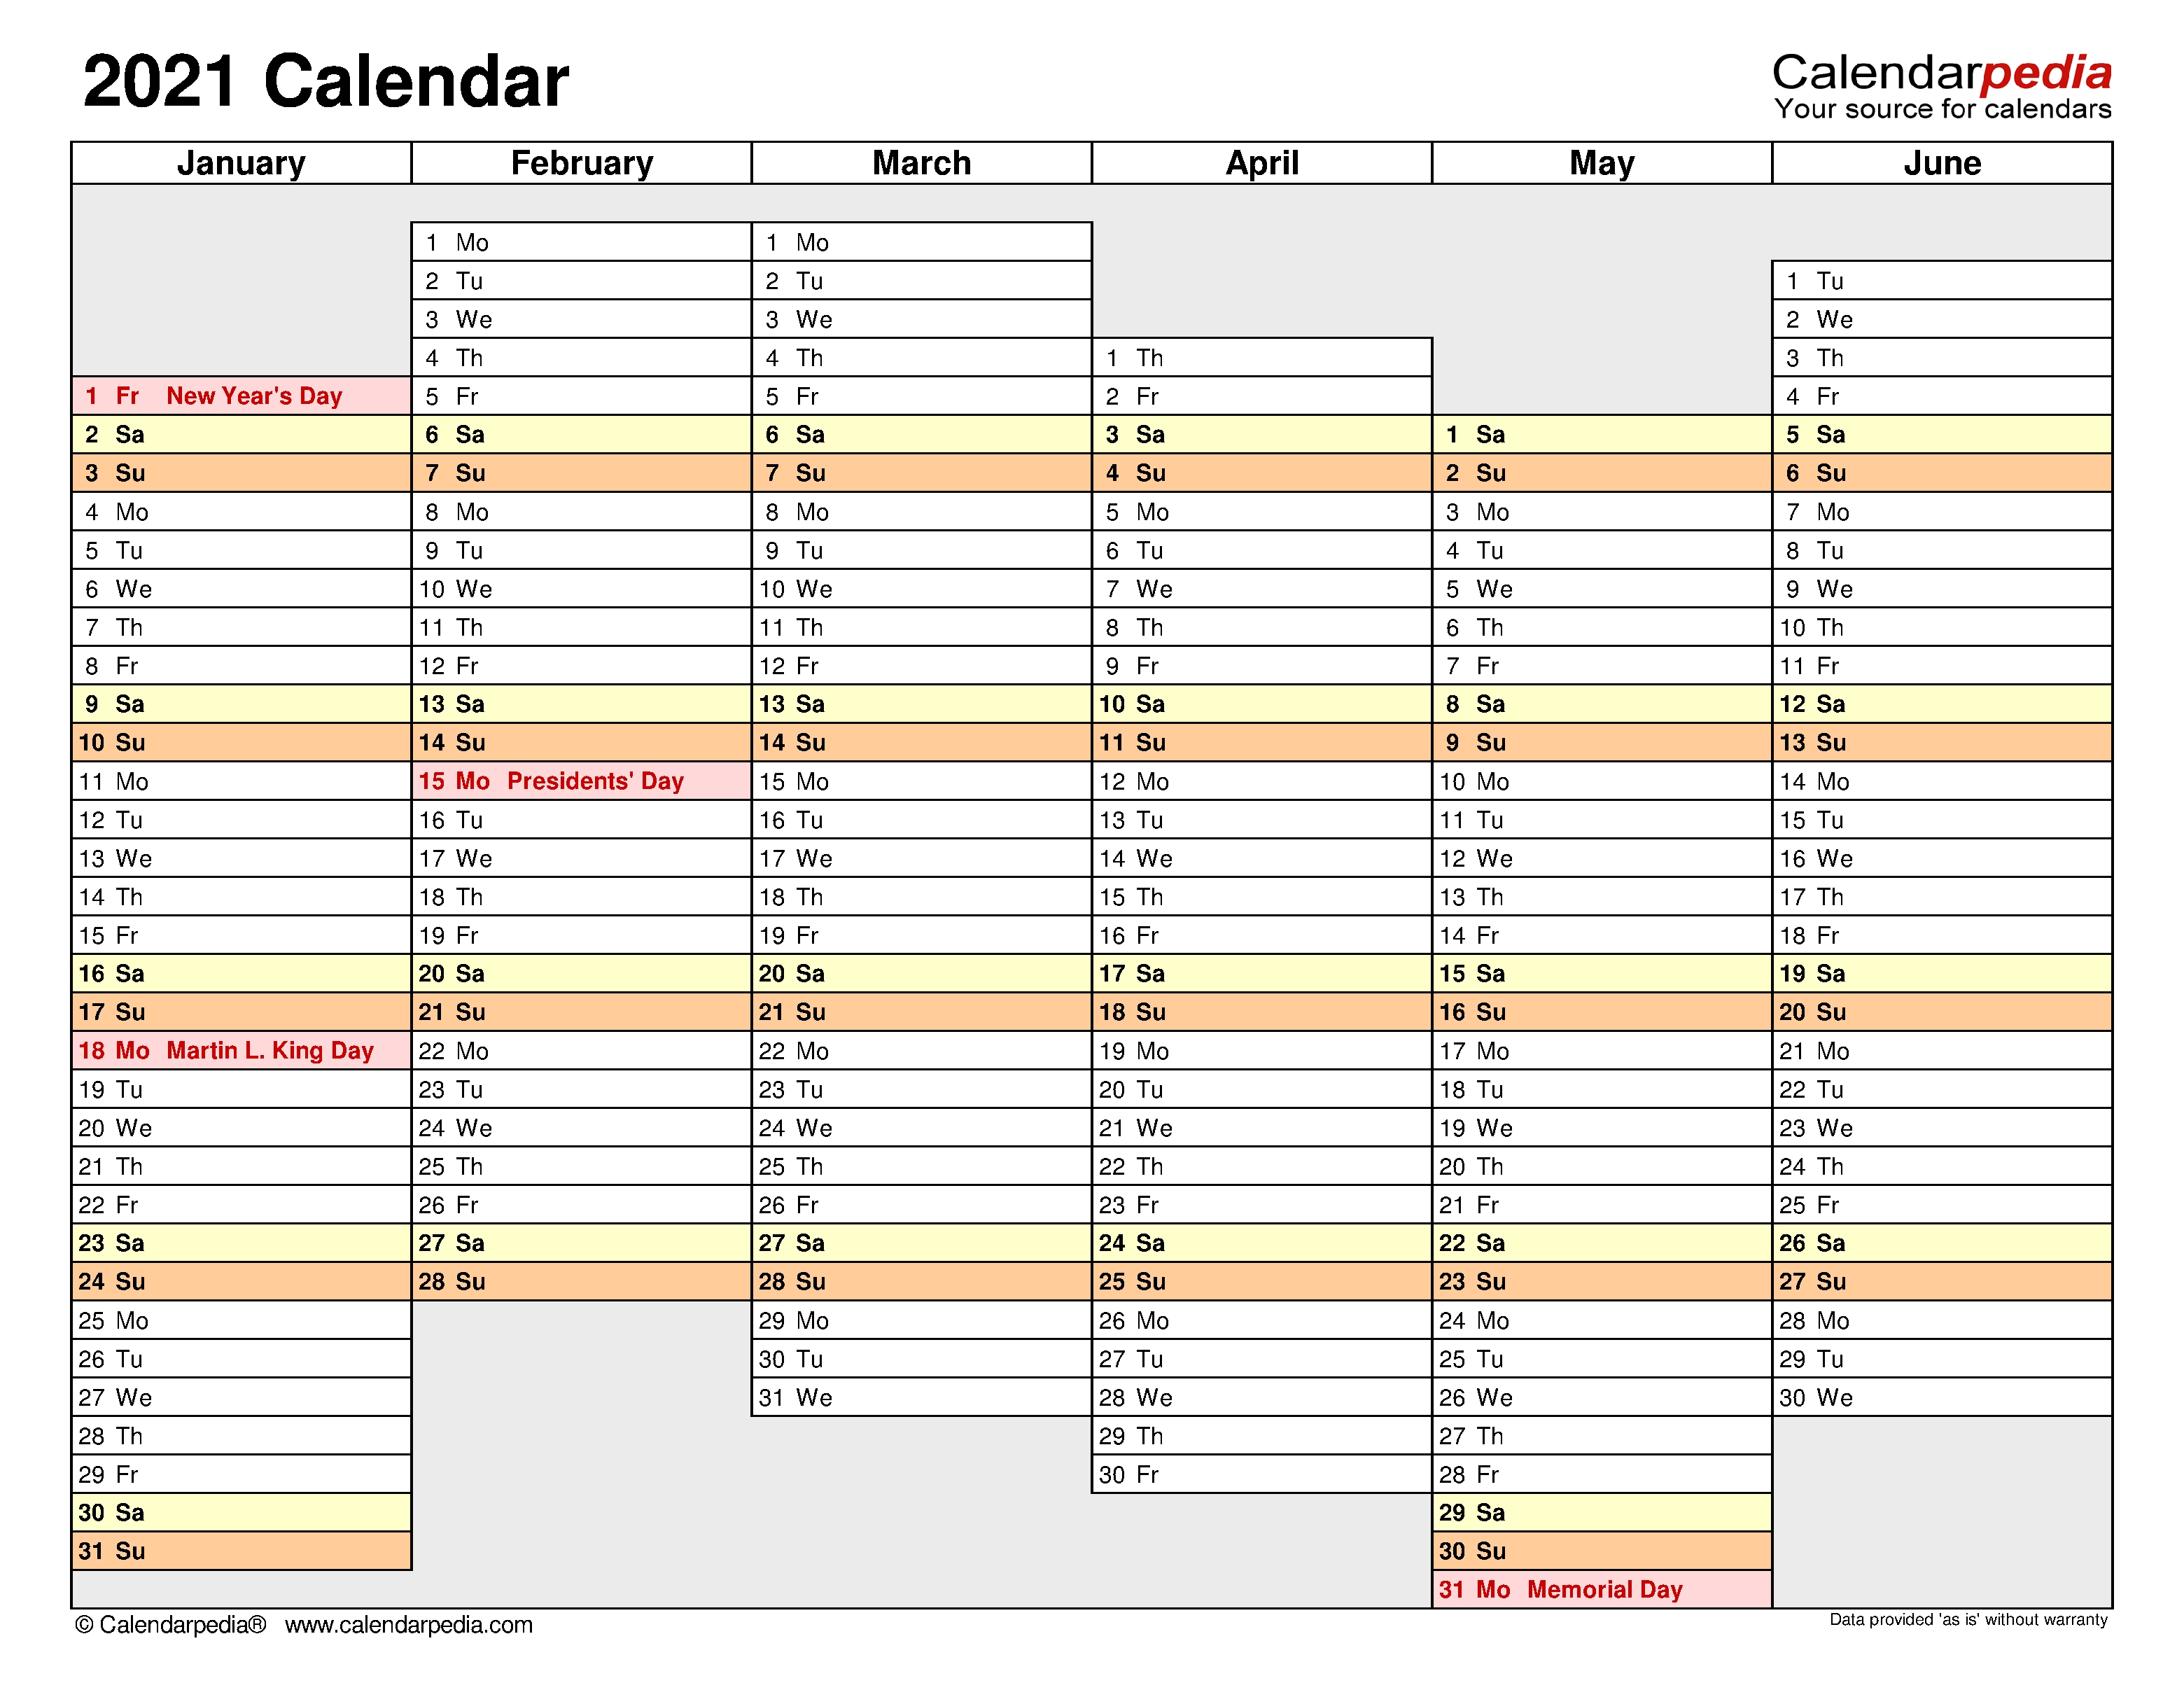 How to Annual Hr Planning Calendar Excel - Get Your ...